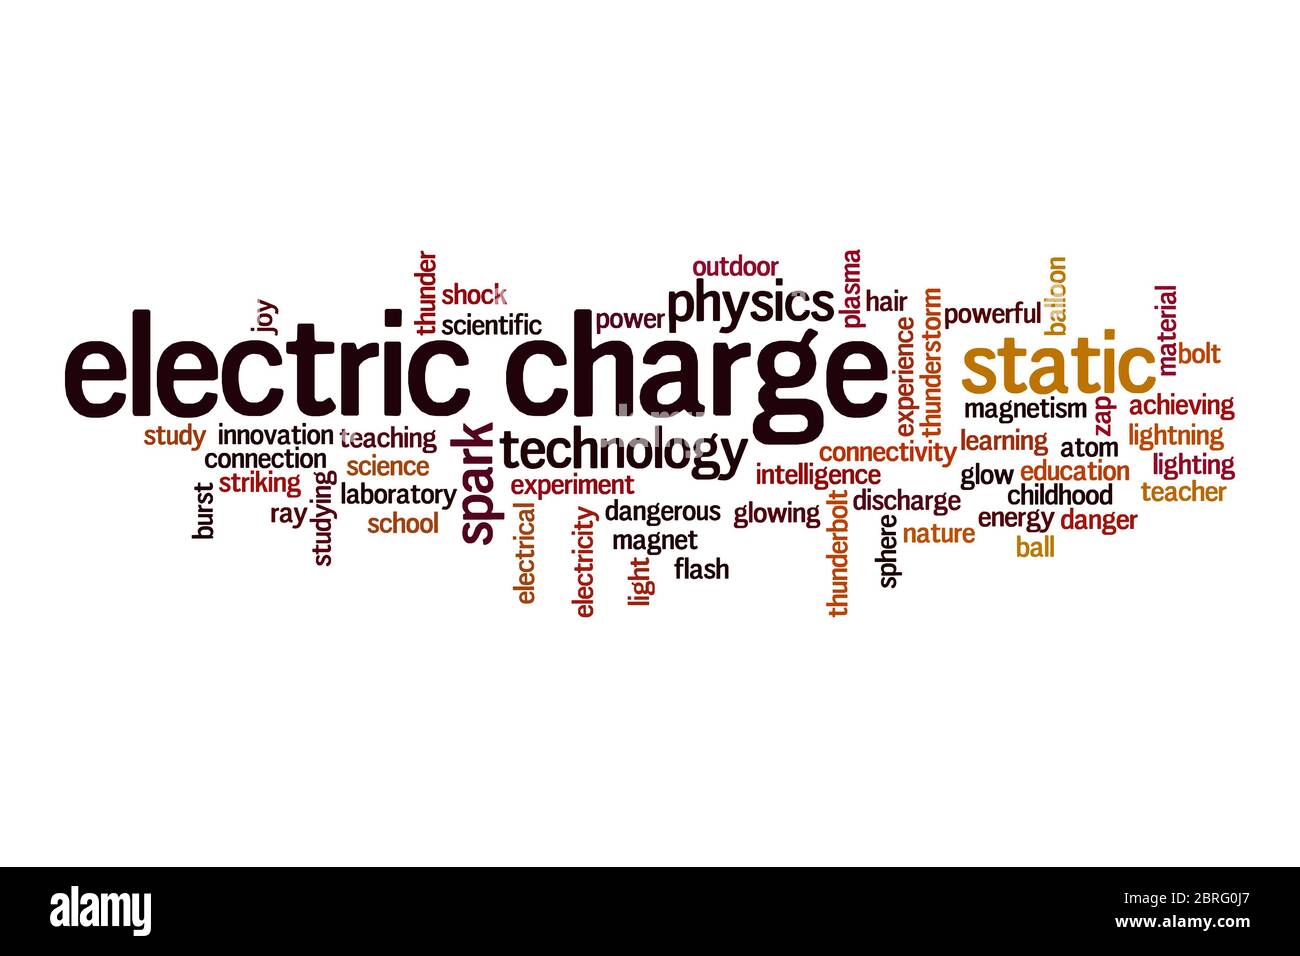 Electric charge cloud concept on white background Stock Photo